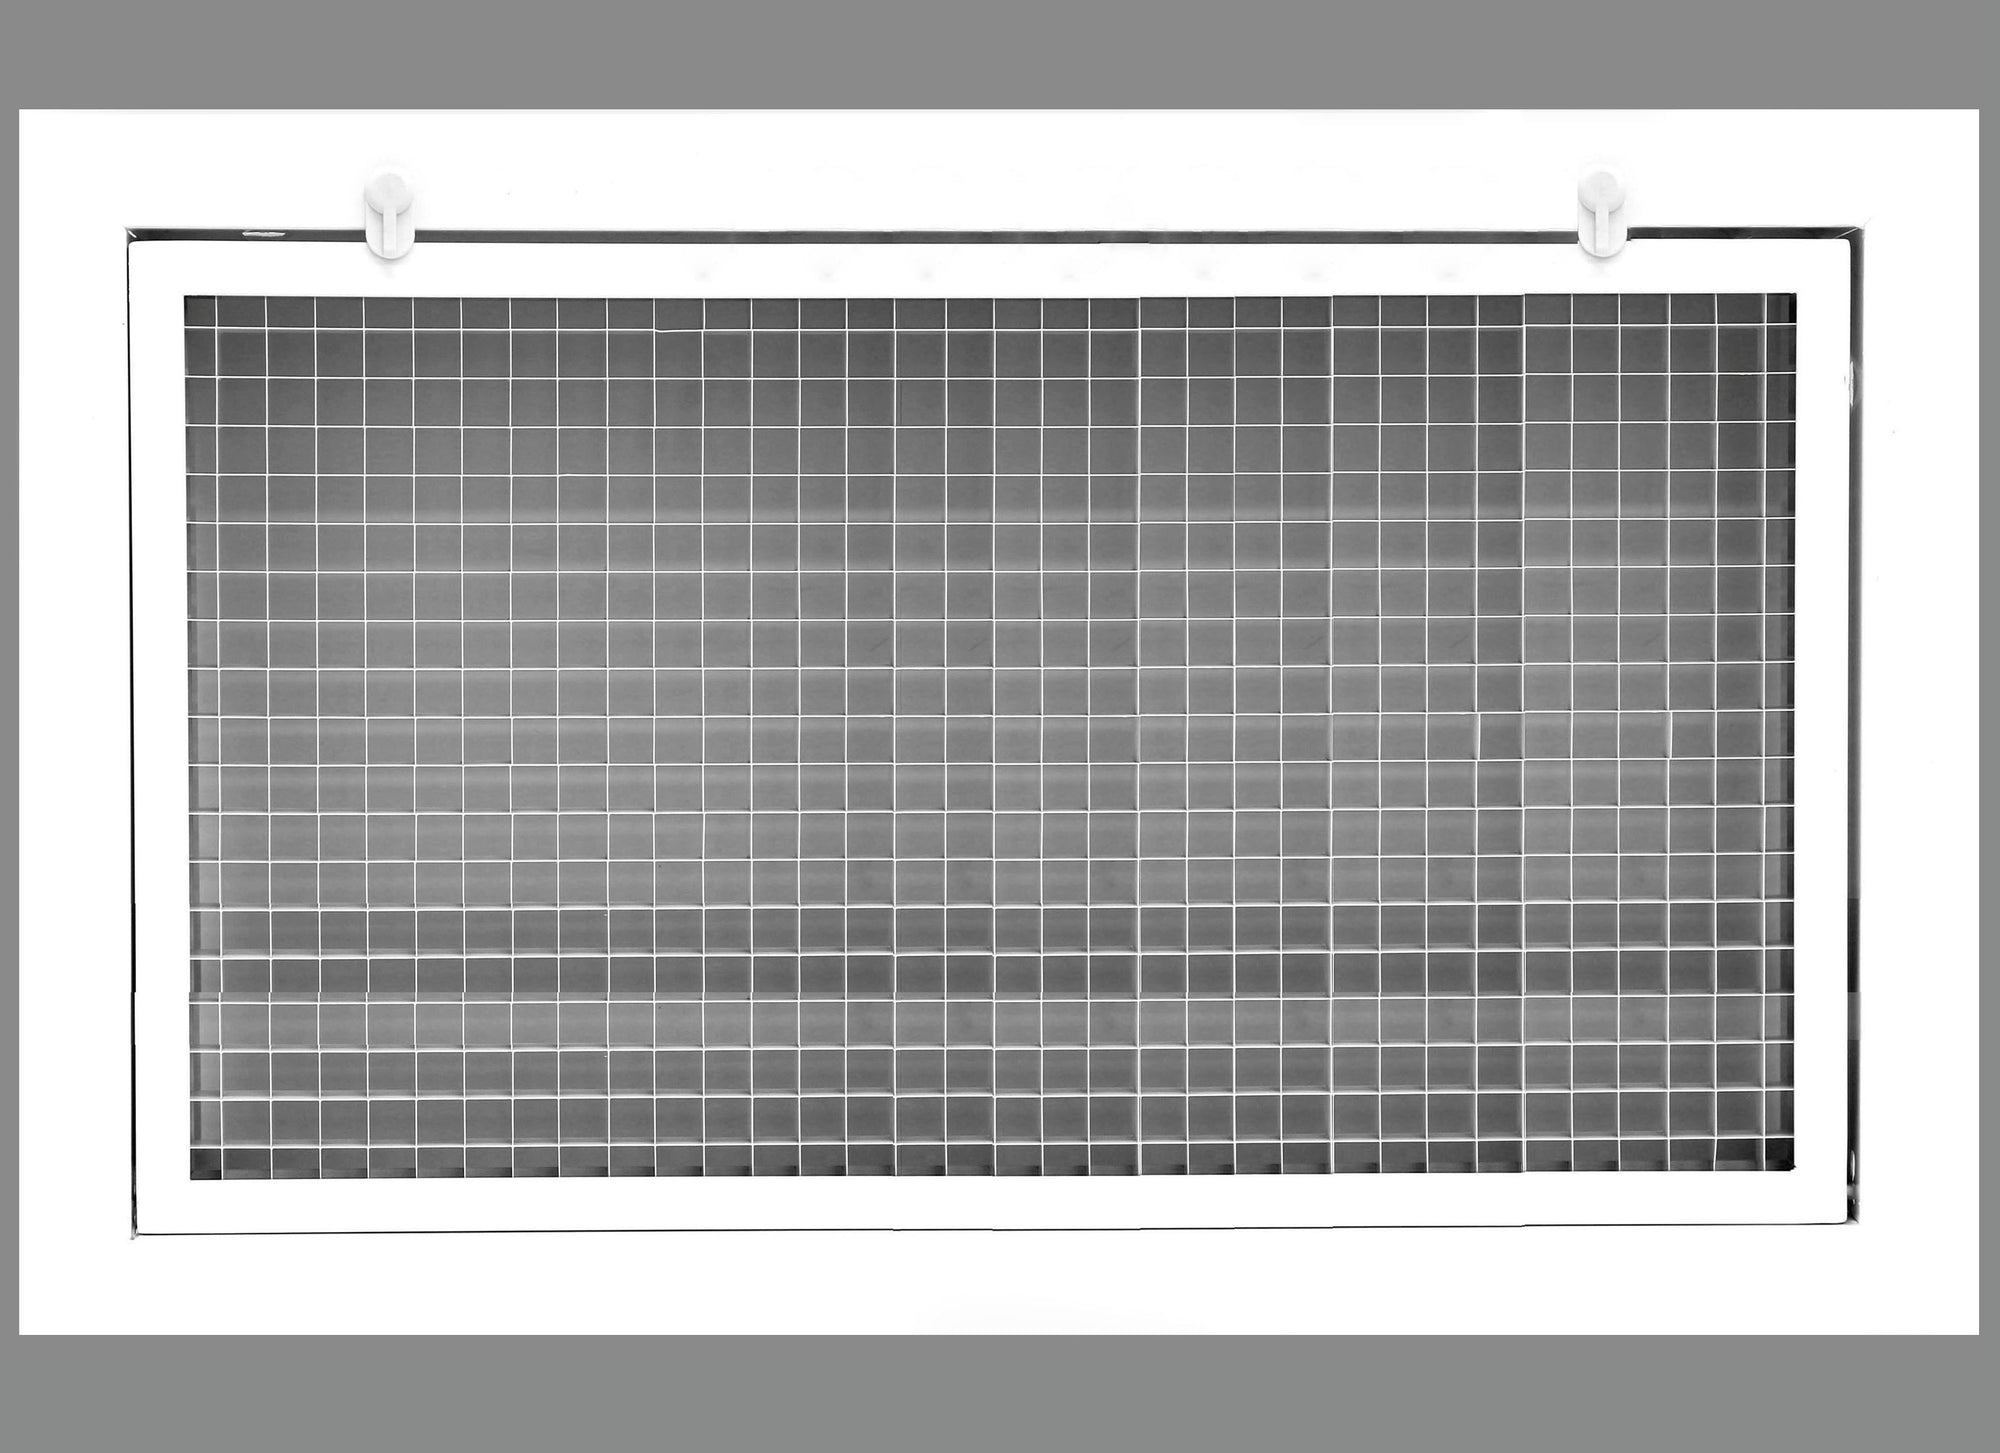 22" x 10" Cube Core Eggcrate Return Air Filter Grille for 1" Filter